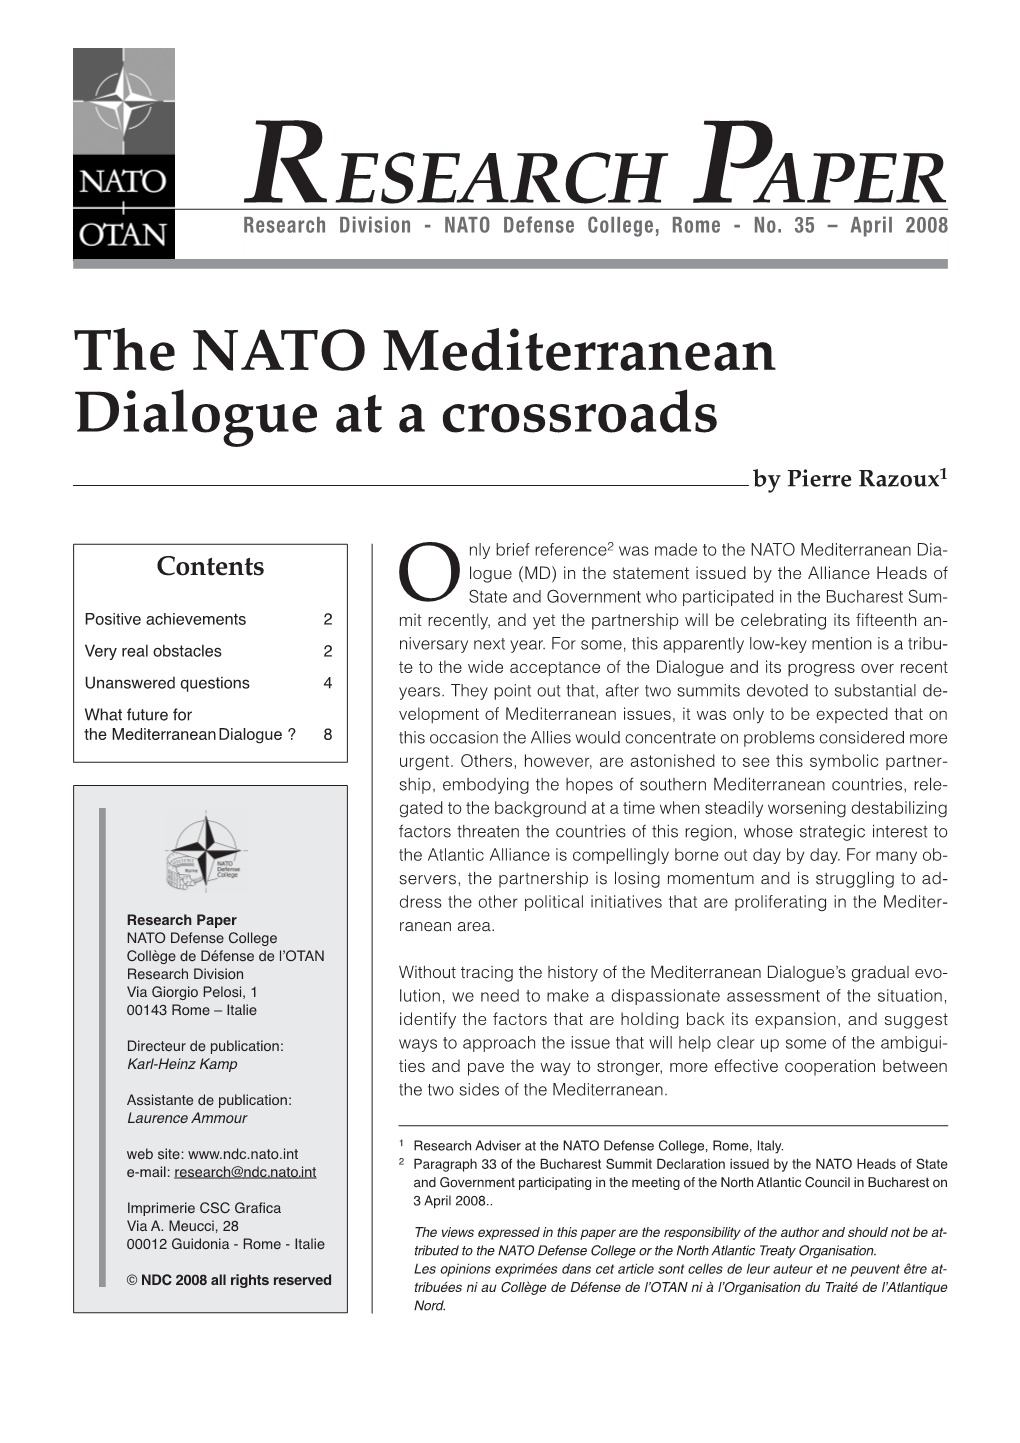 The NATO Mediterranean Dialogue at a Crossroads by Pierre Razoux1